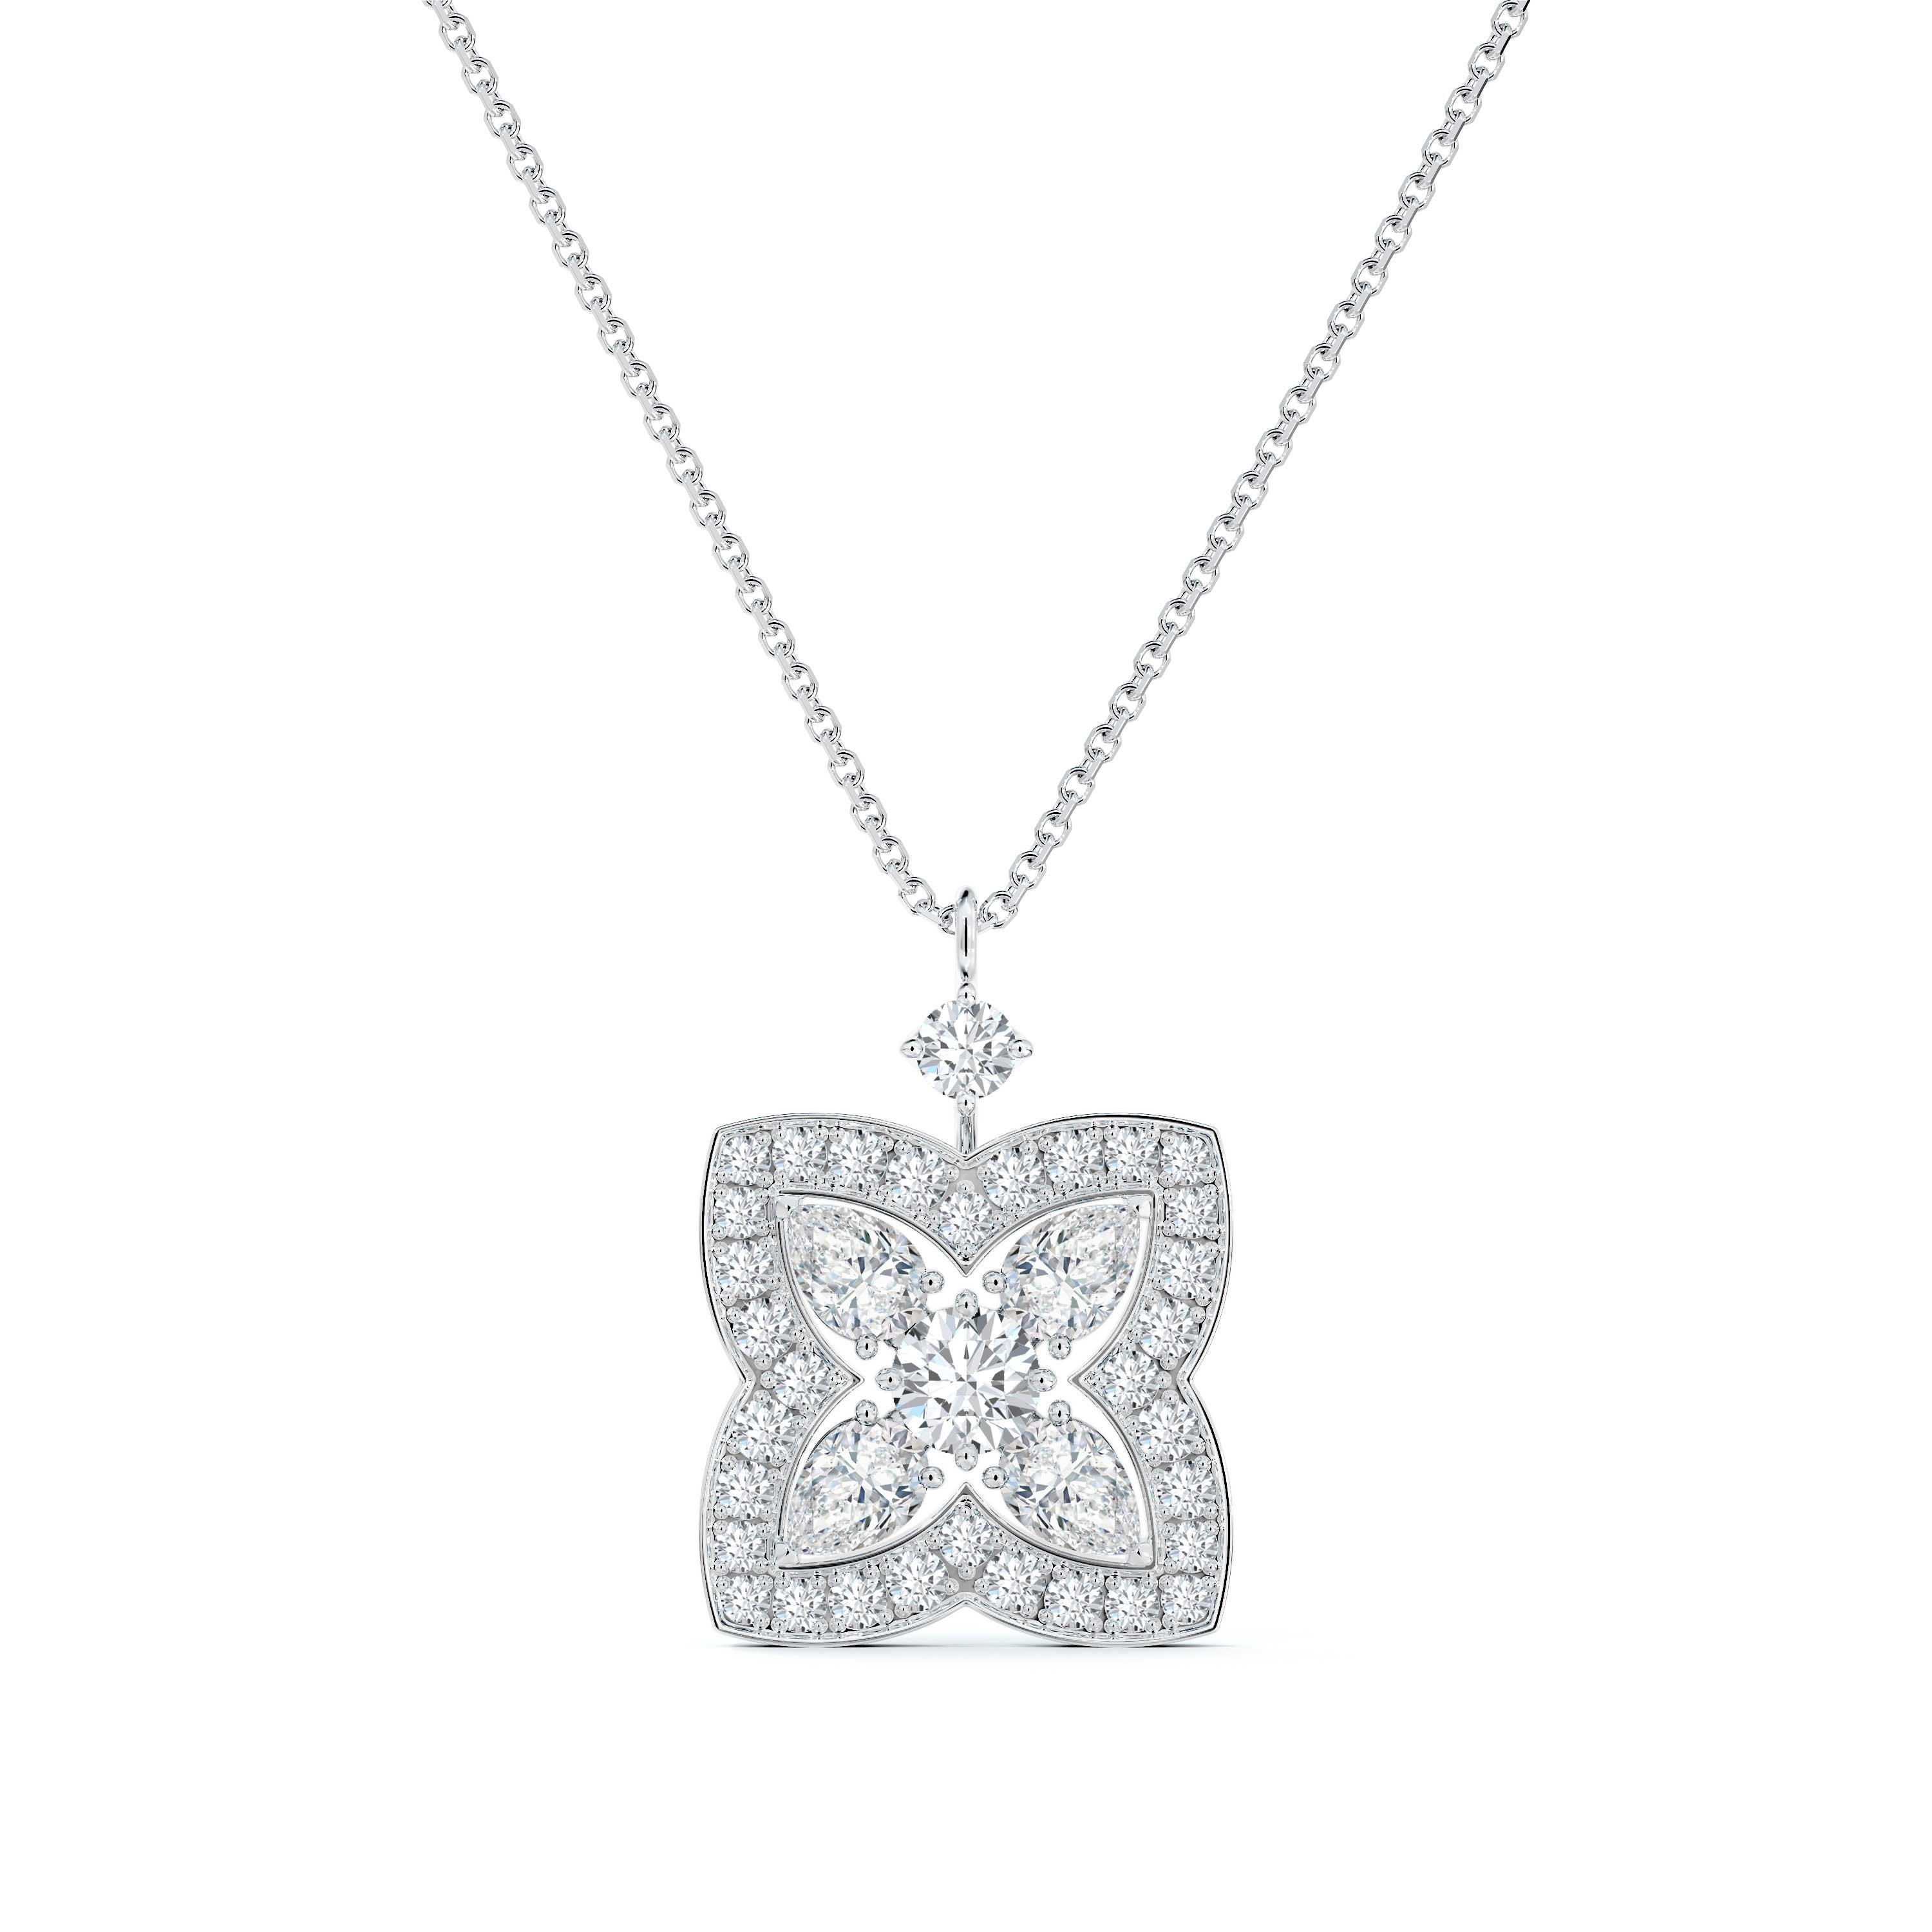 Enchanted Lotus necklace in white gold, image 2